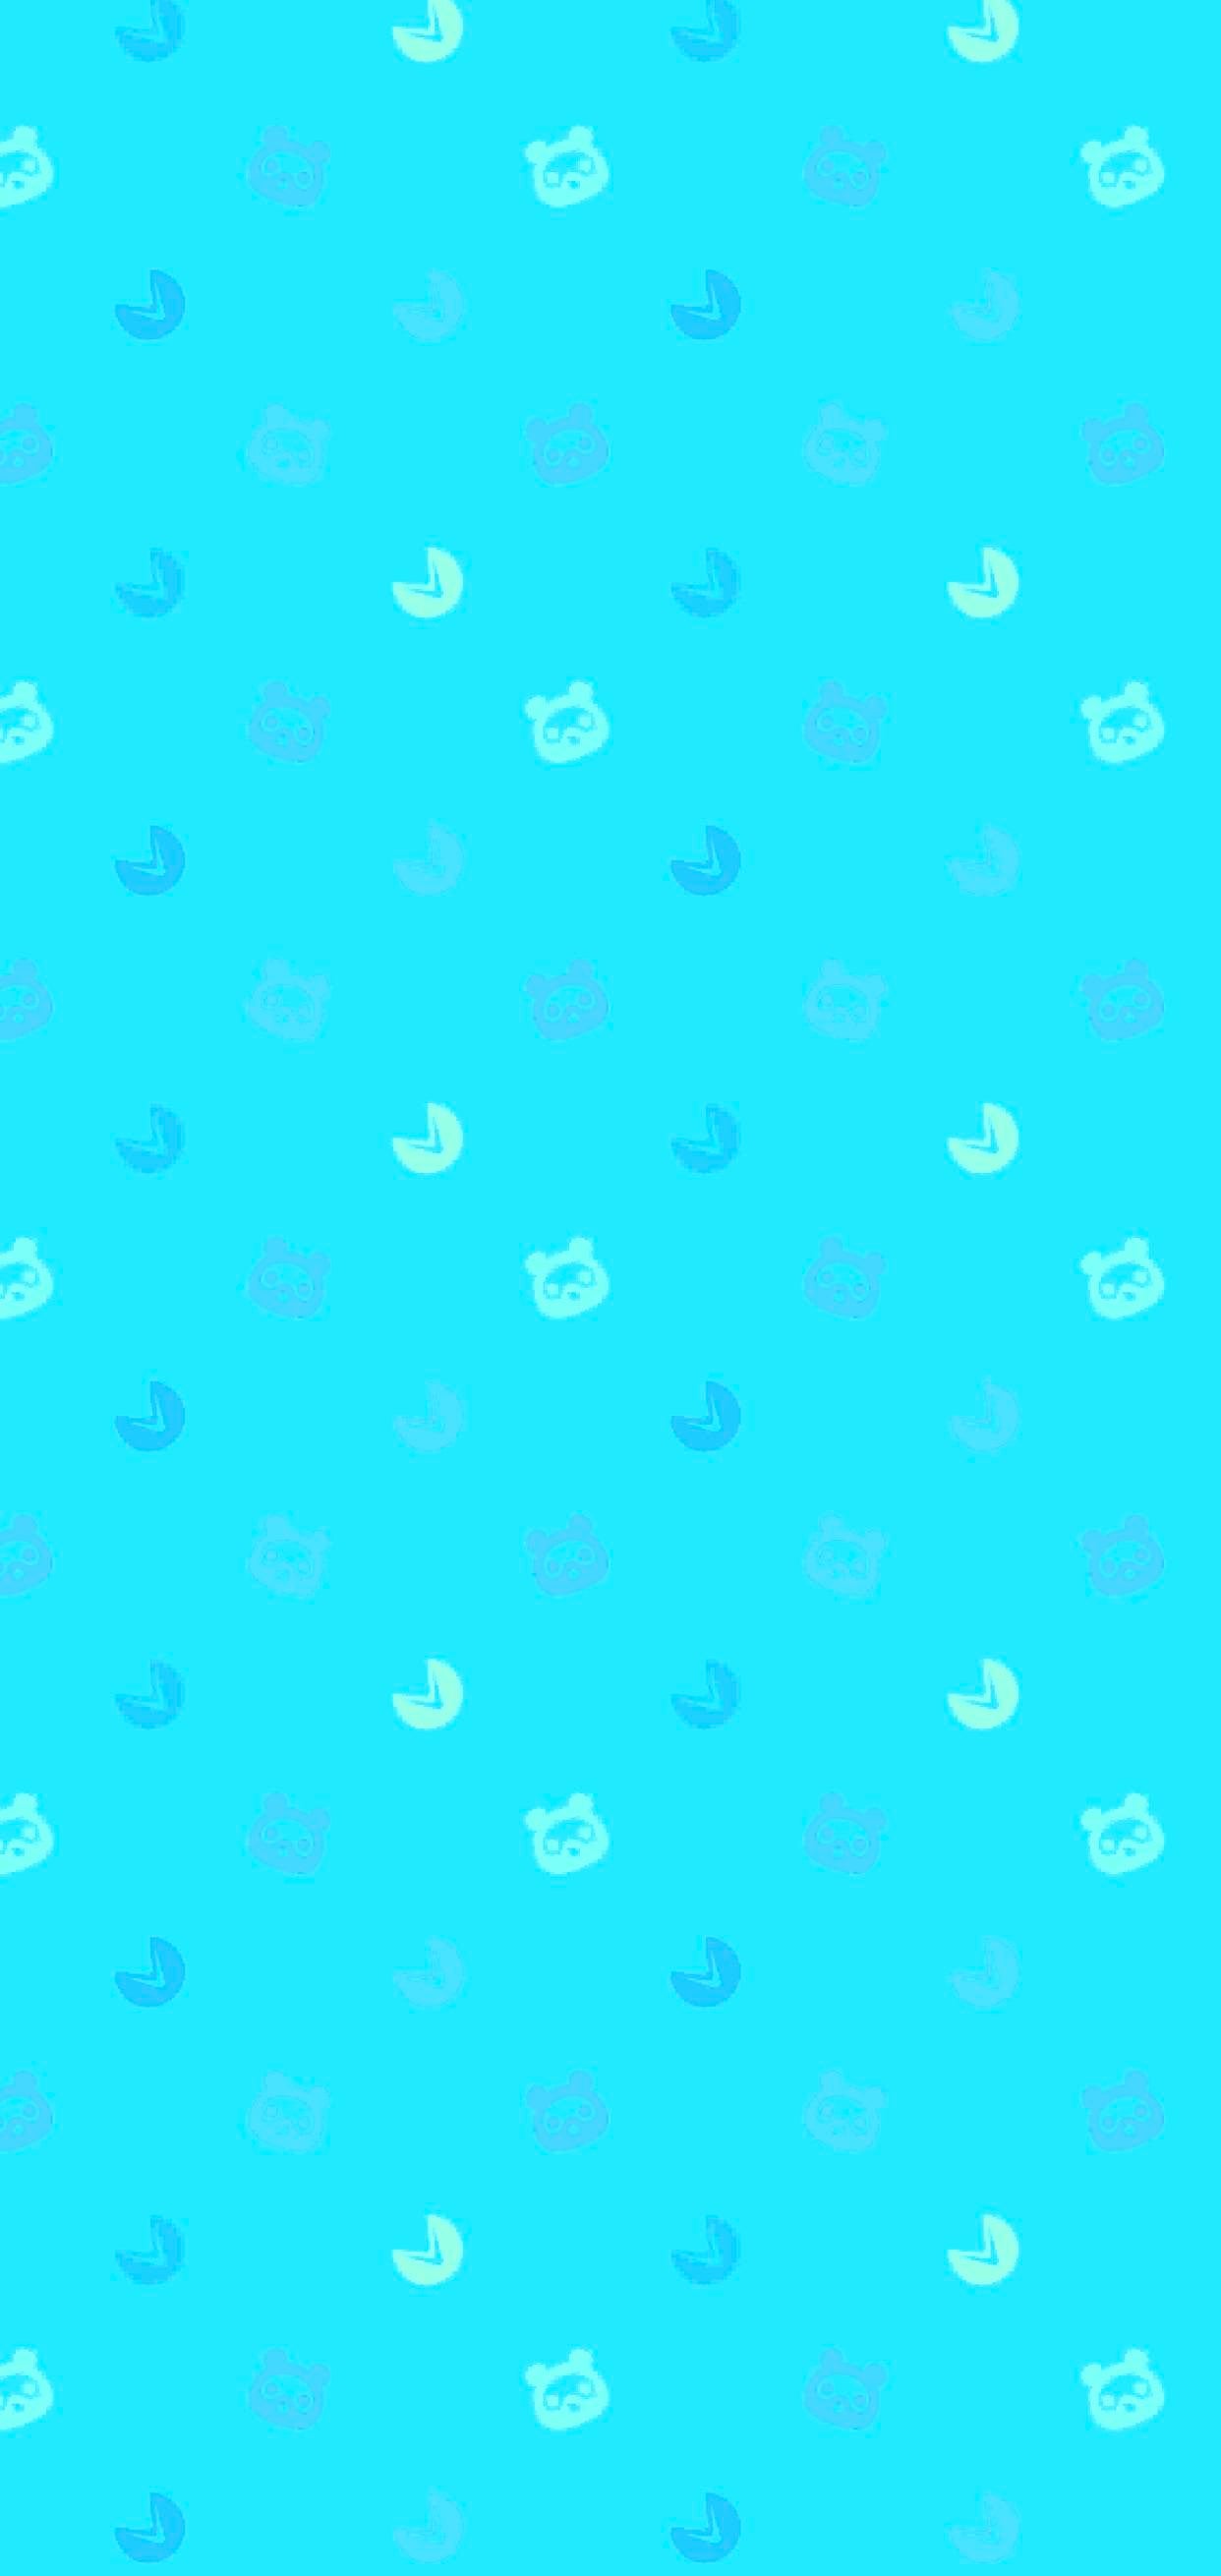 Here is the cyan wallpaper as requested Once again enjoy r